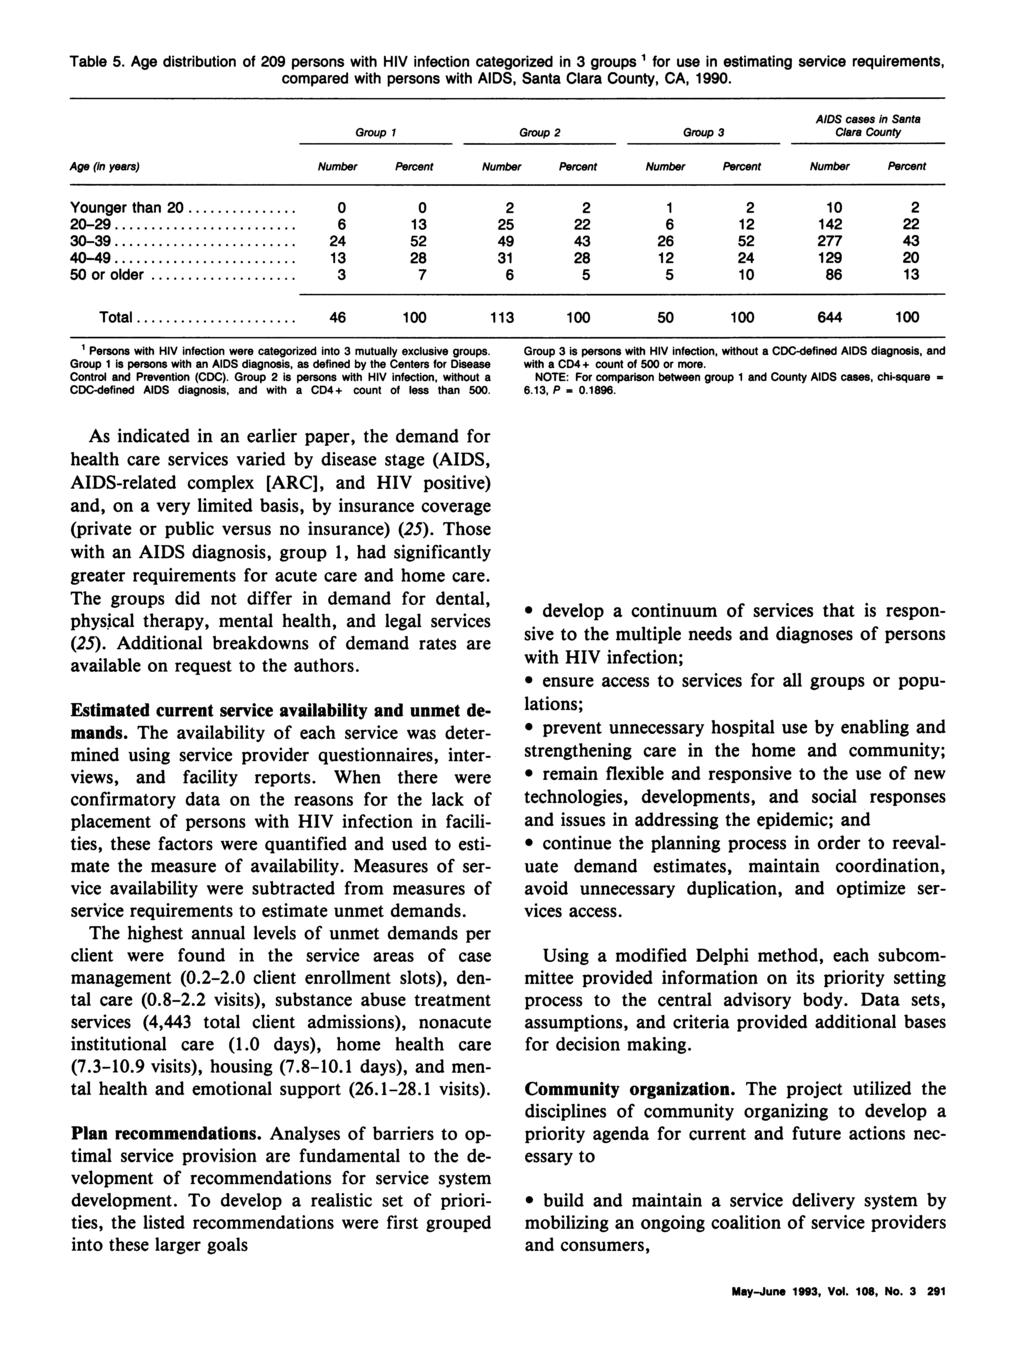 Table 5. Age distribution of 209 persons with HIV infection categorized in 3 groups 1 for use in estimating service requirements, compared with persons with AIDS, Santa Clara County, CA, 1990.